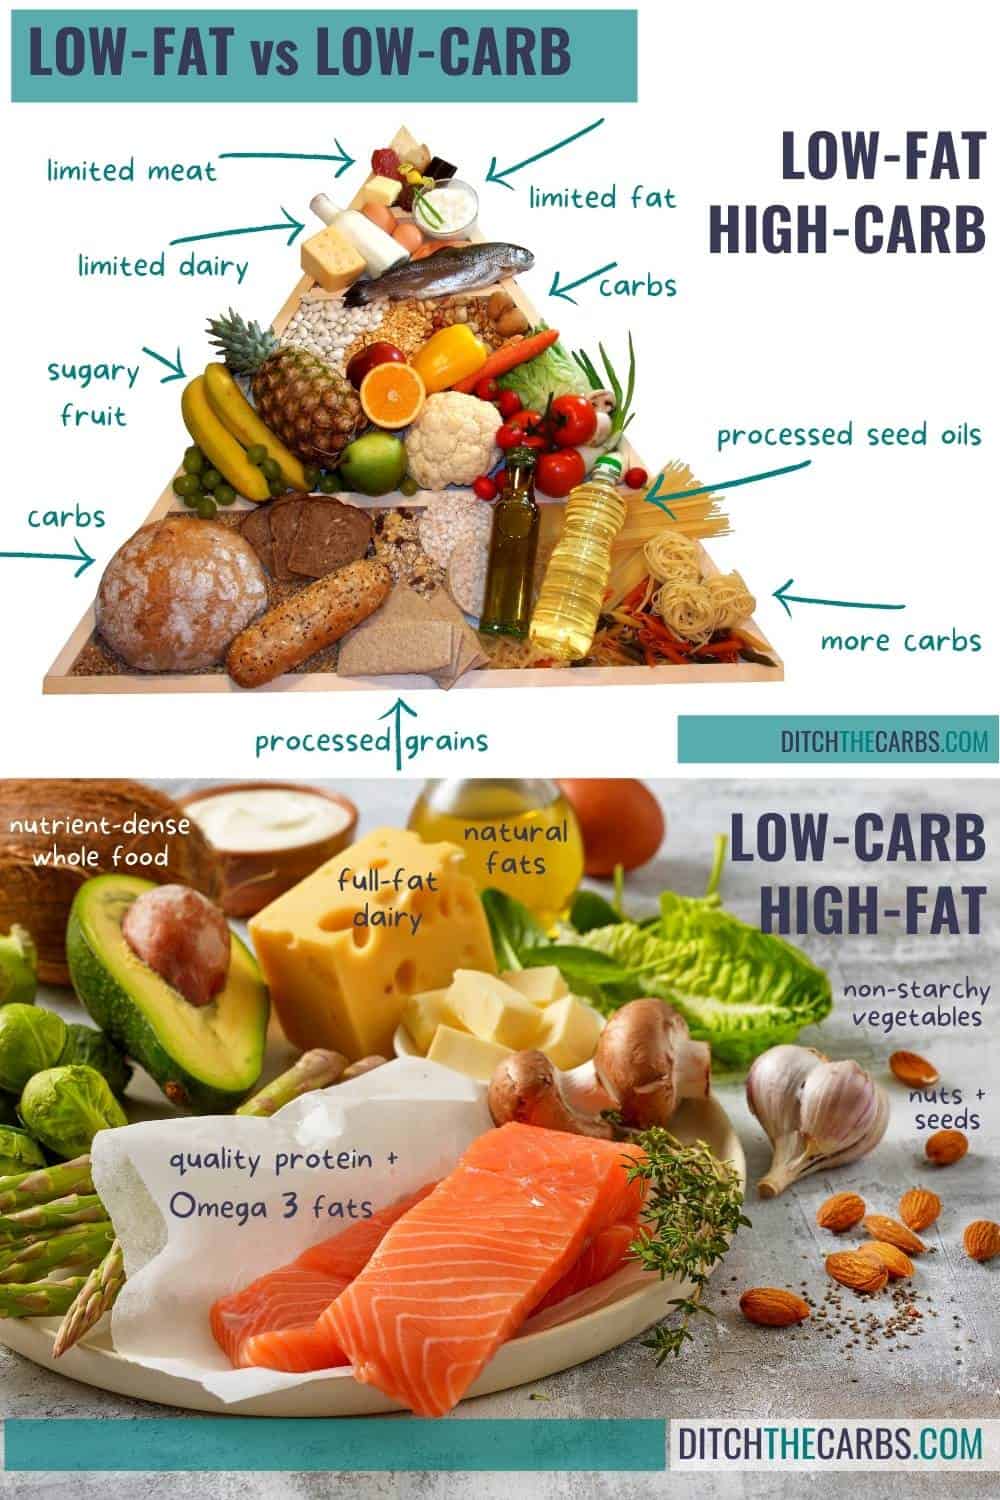 low carb vs low fat diet showing 2 different food pyramids